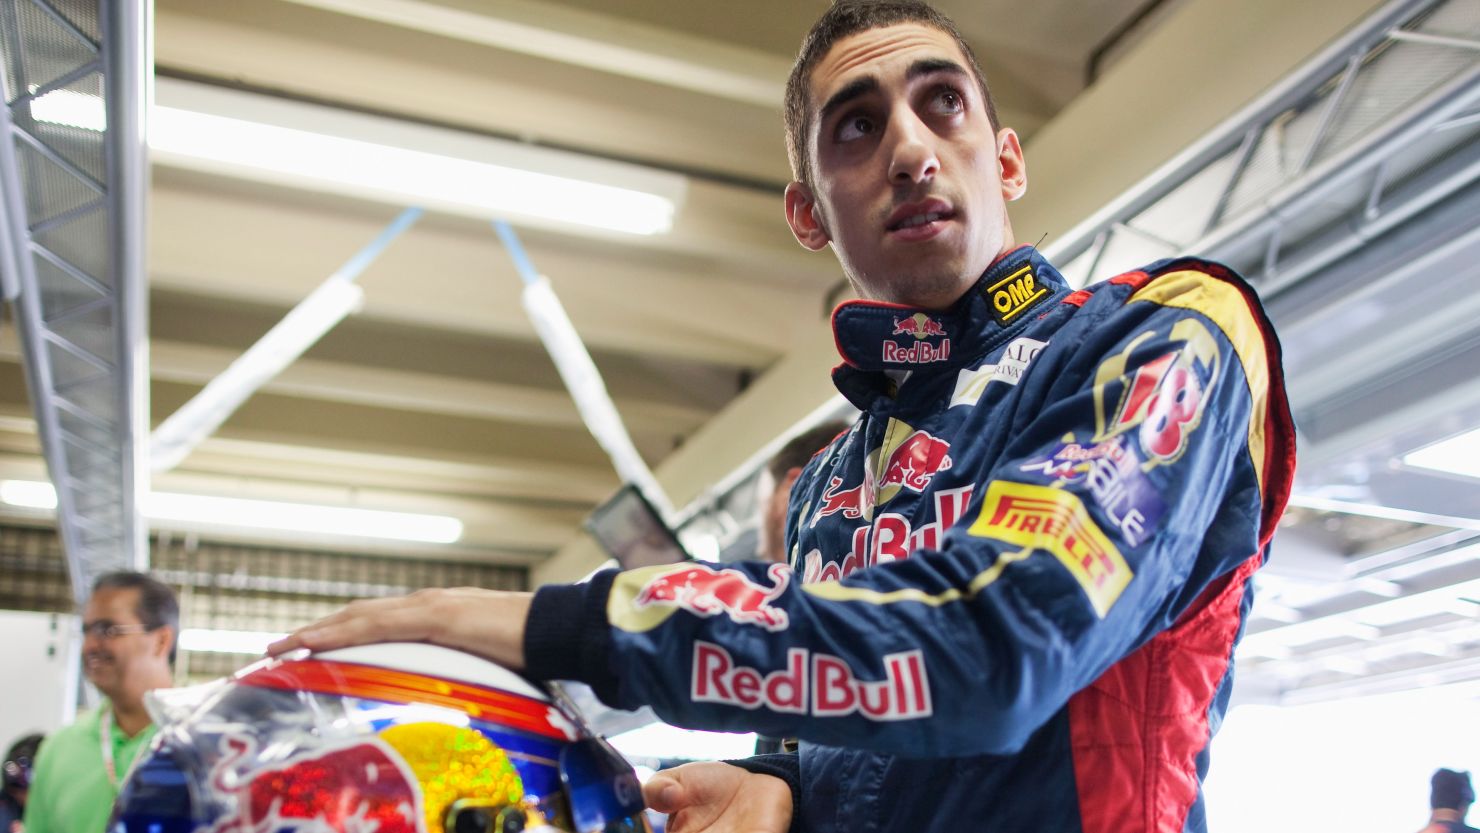 Swiss driver Sebastien Buemi made his Formula One debut with Toro Rosso in 2009.